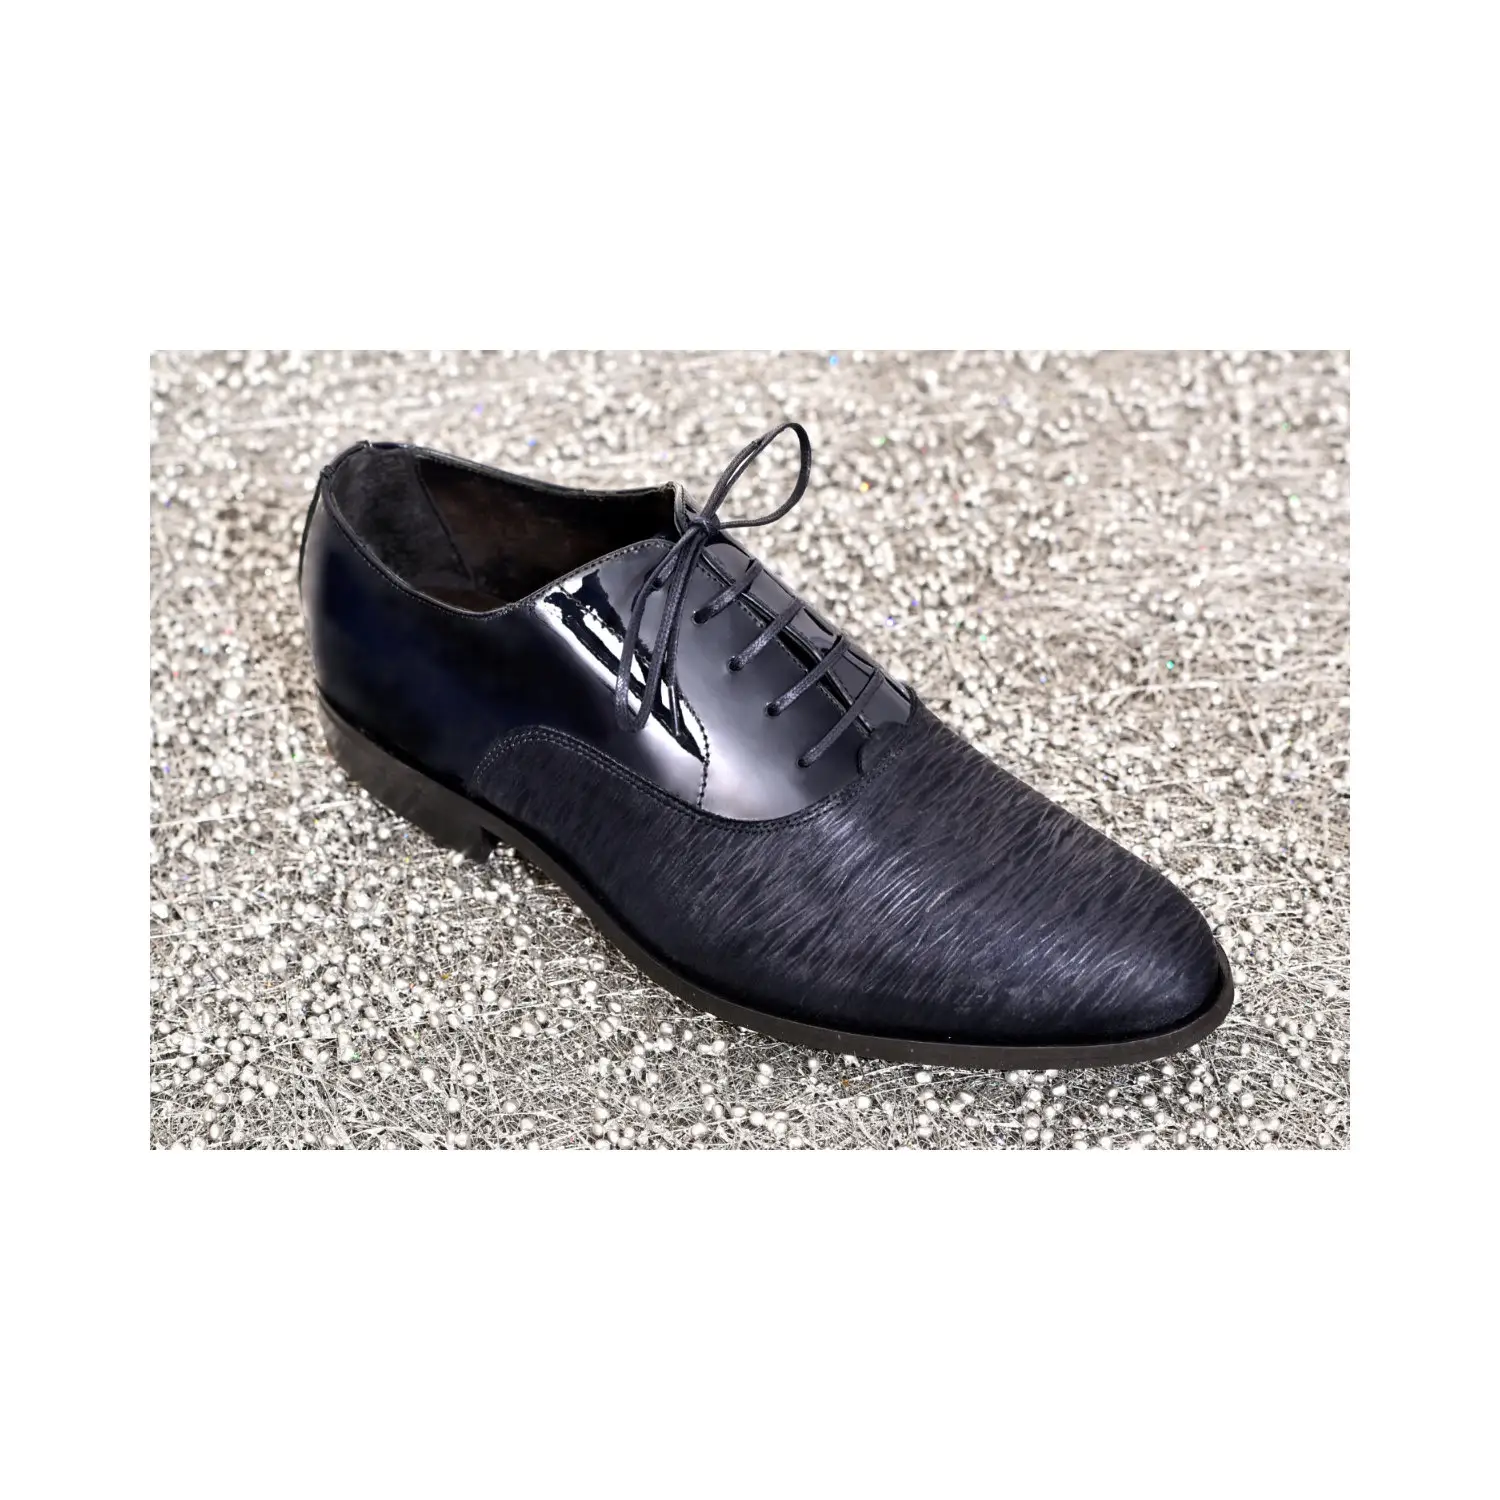 Italian Men Shoes Trendy Fashion Dress Shoes & Oxford - Textile Pattern and Calf Leather ideal Dress Shoes for Wedding